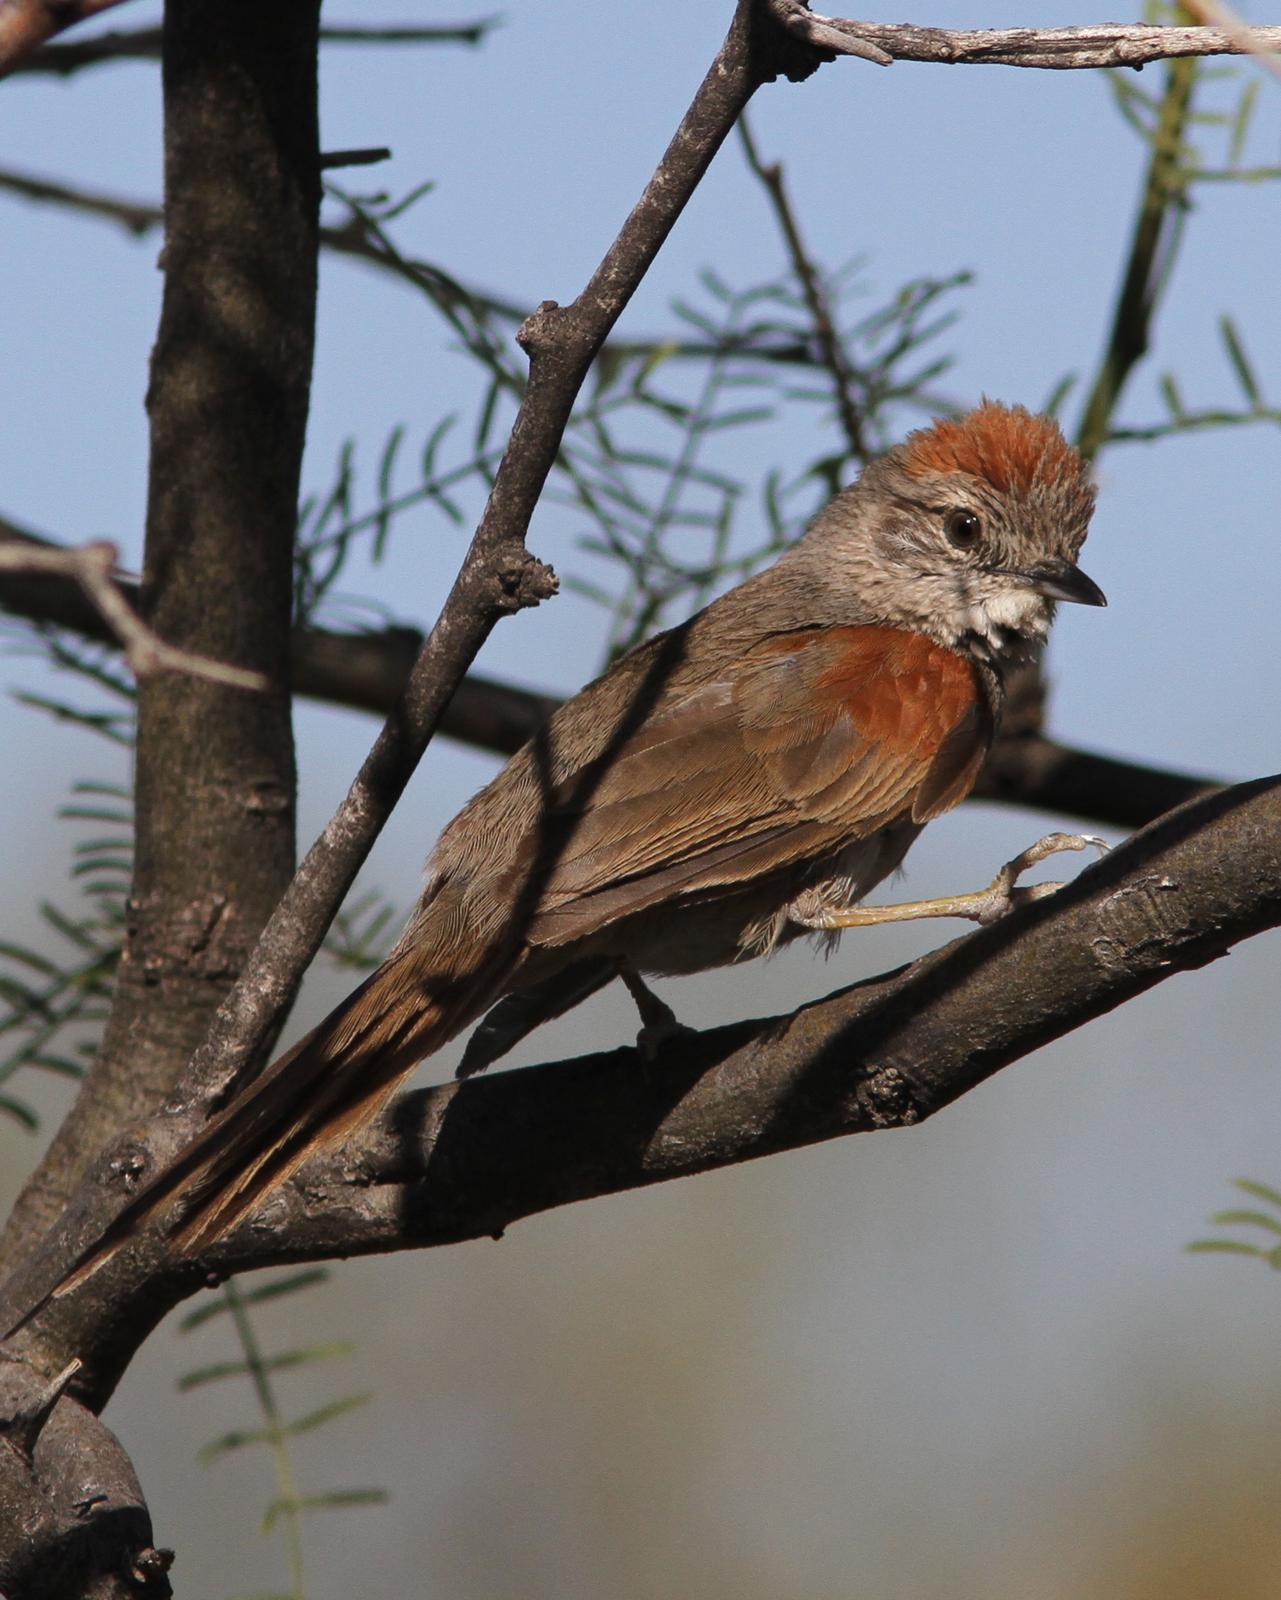 Sooty-fronted Spinetail Photo by Marcelo Padua